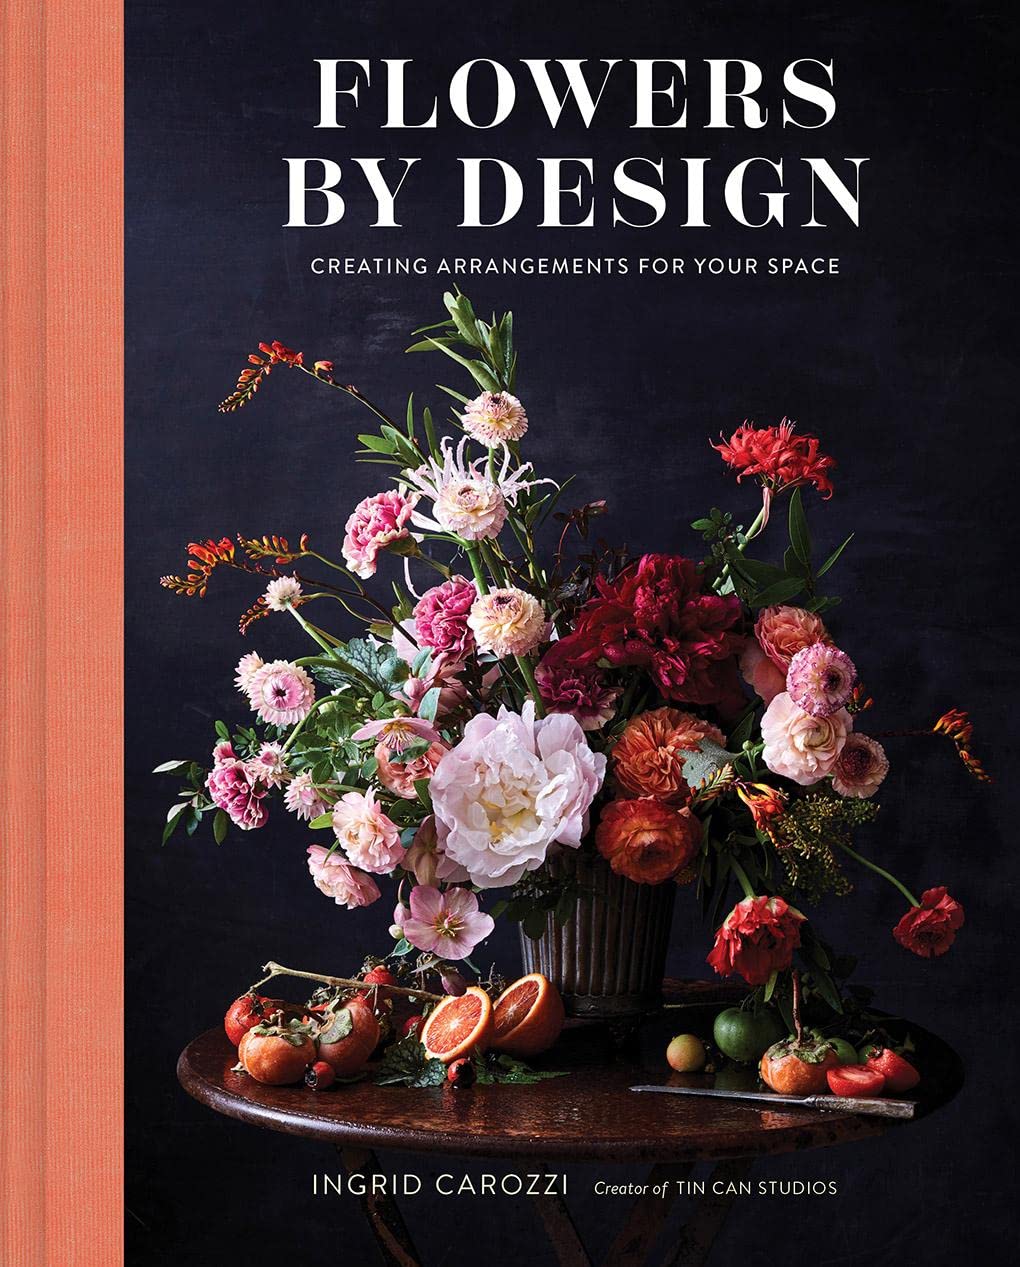 THE EDIT: COFFEE TABLE BOOKS – INK + PORCELAIN